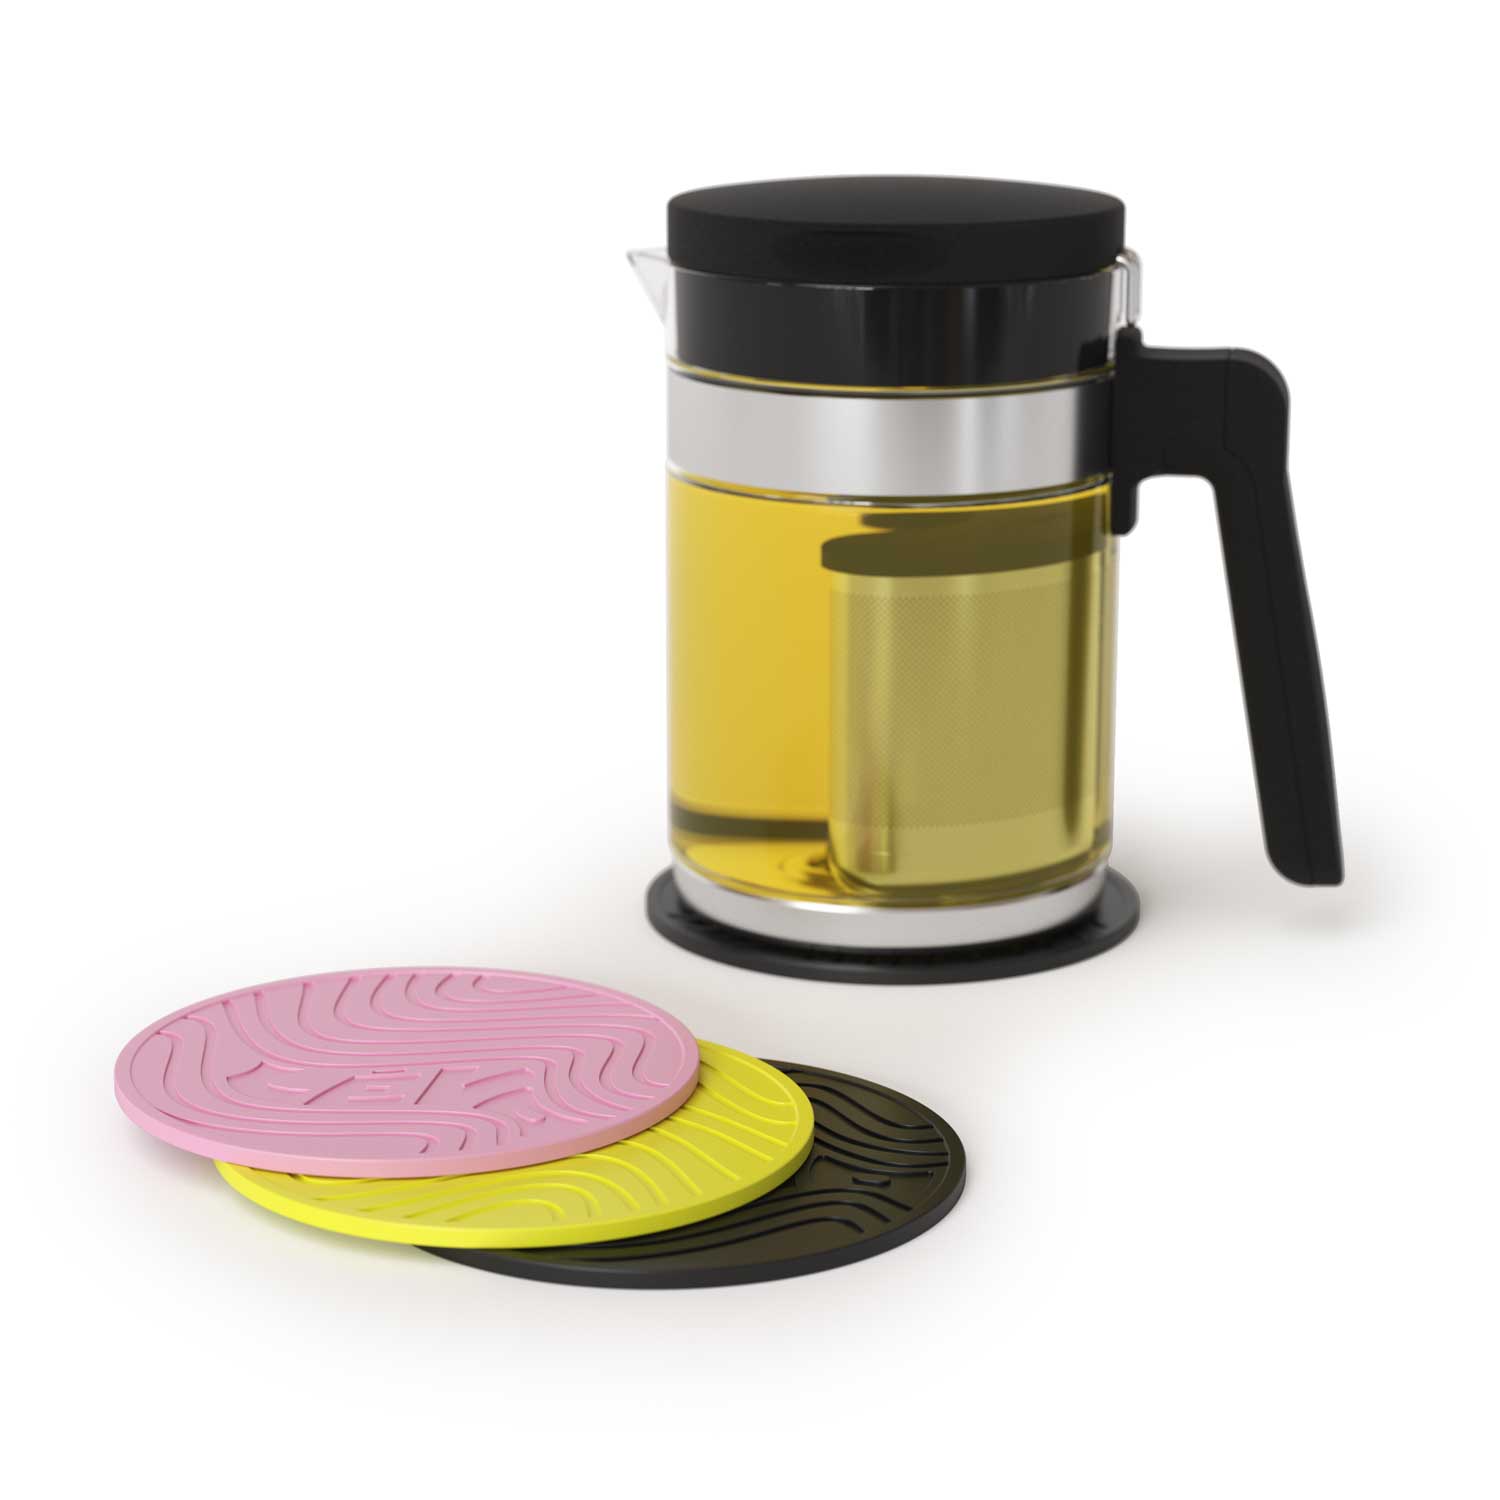 LĒVO Silicone Trivets in yellow, pink, and black shown with LĒVO C 